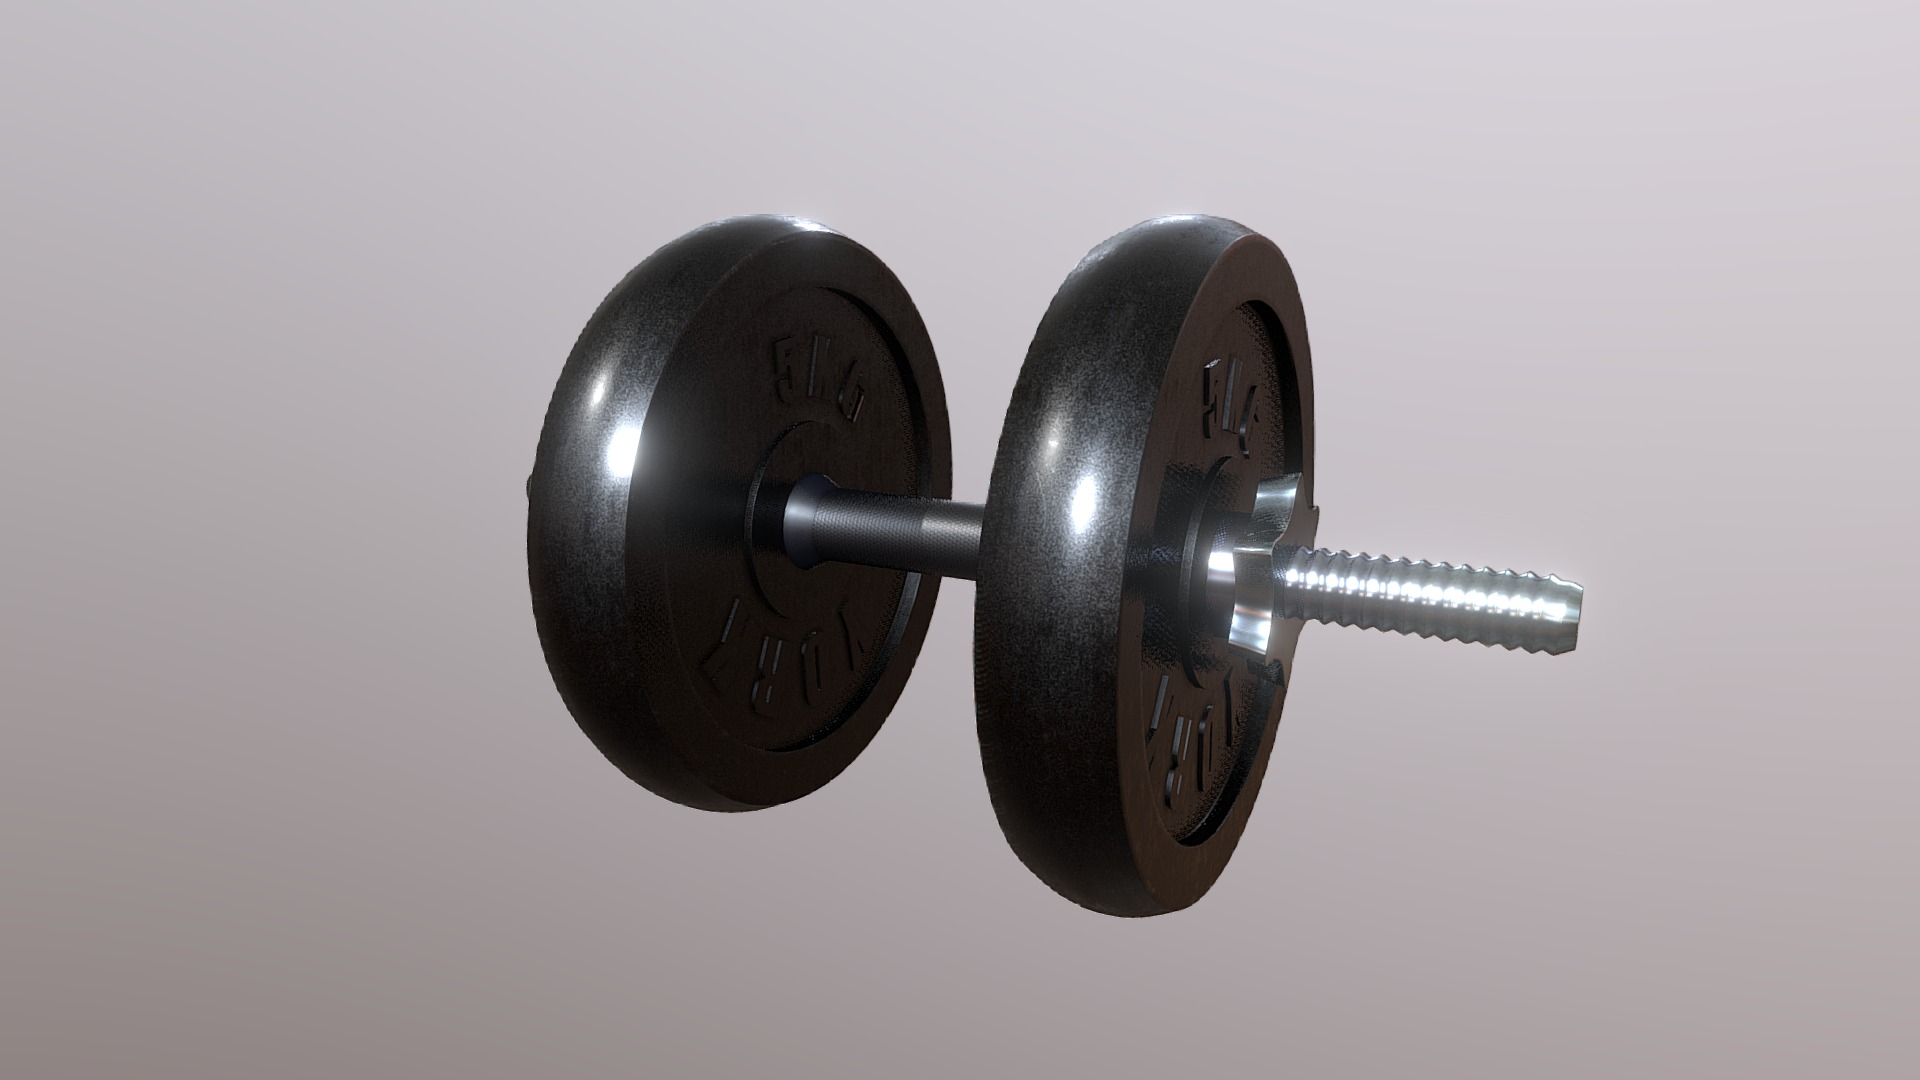 3D model Metal Dumbbells - This is a 3D model of the Metal Dumbbells. The 3D model is about a pair of black and silver dumbbells.